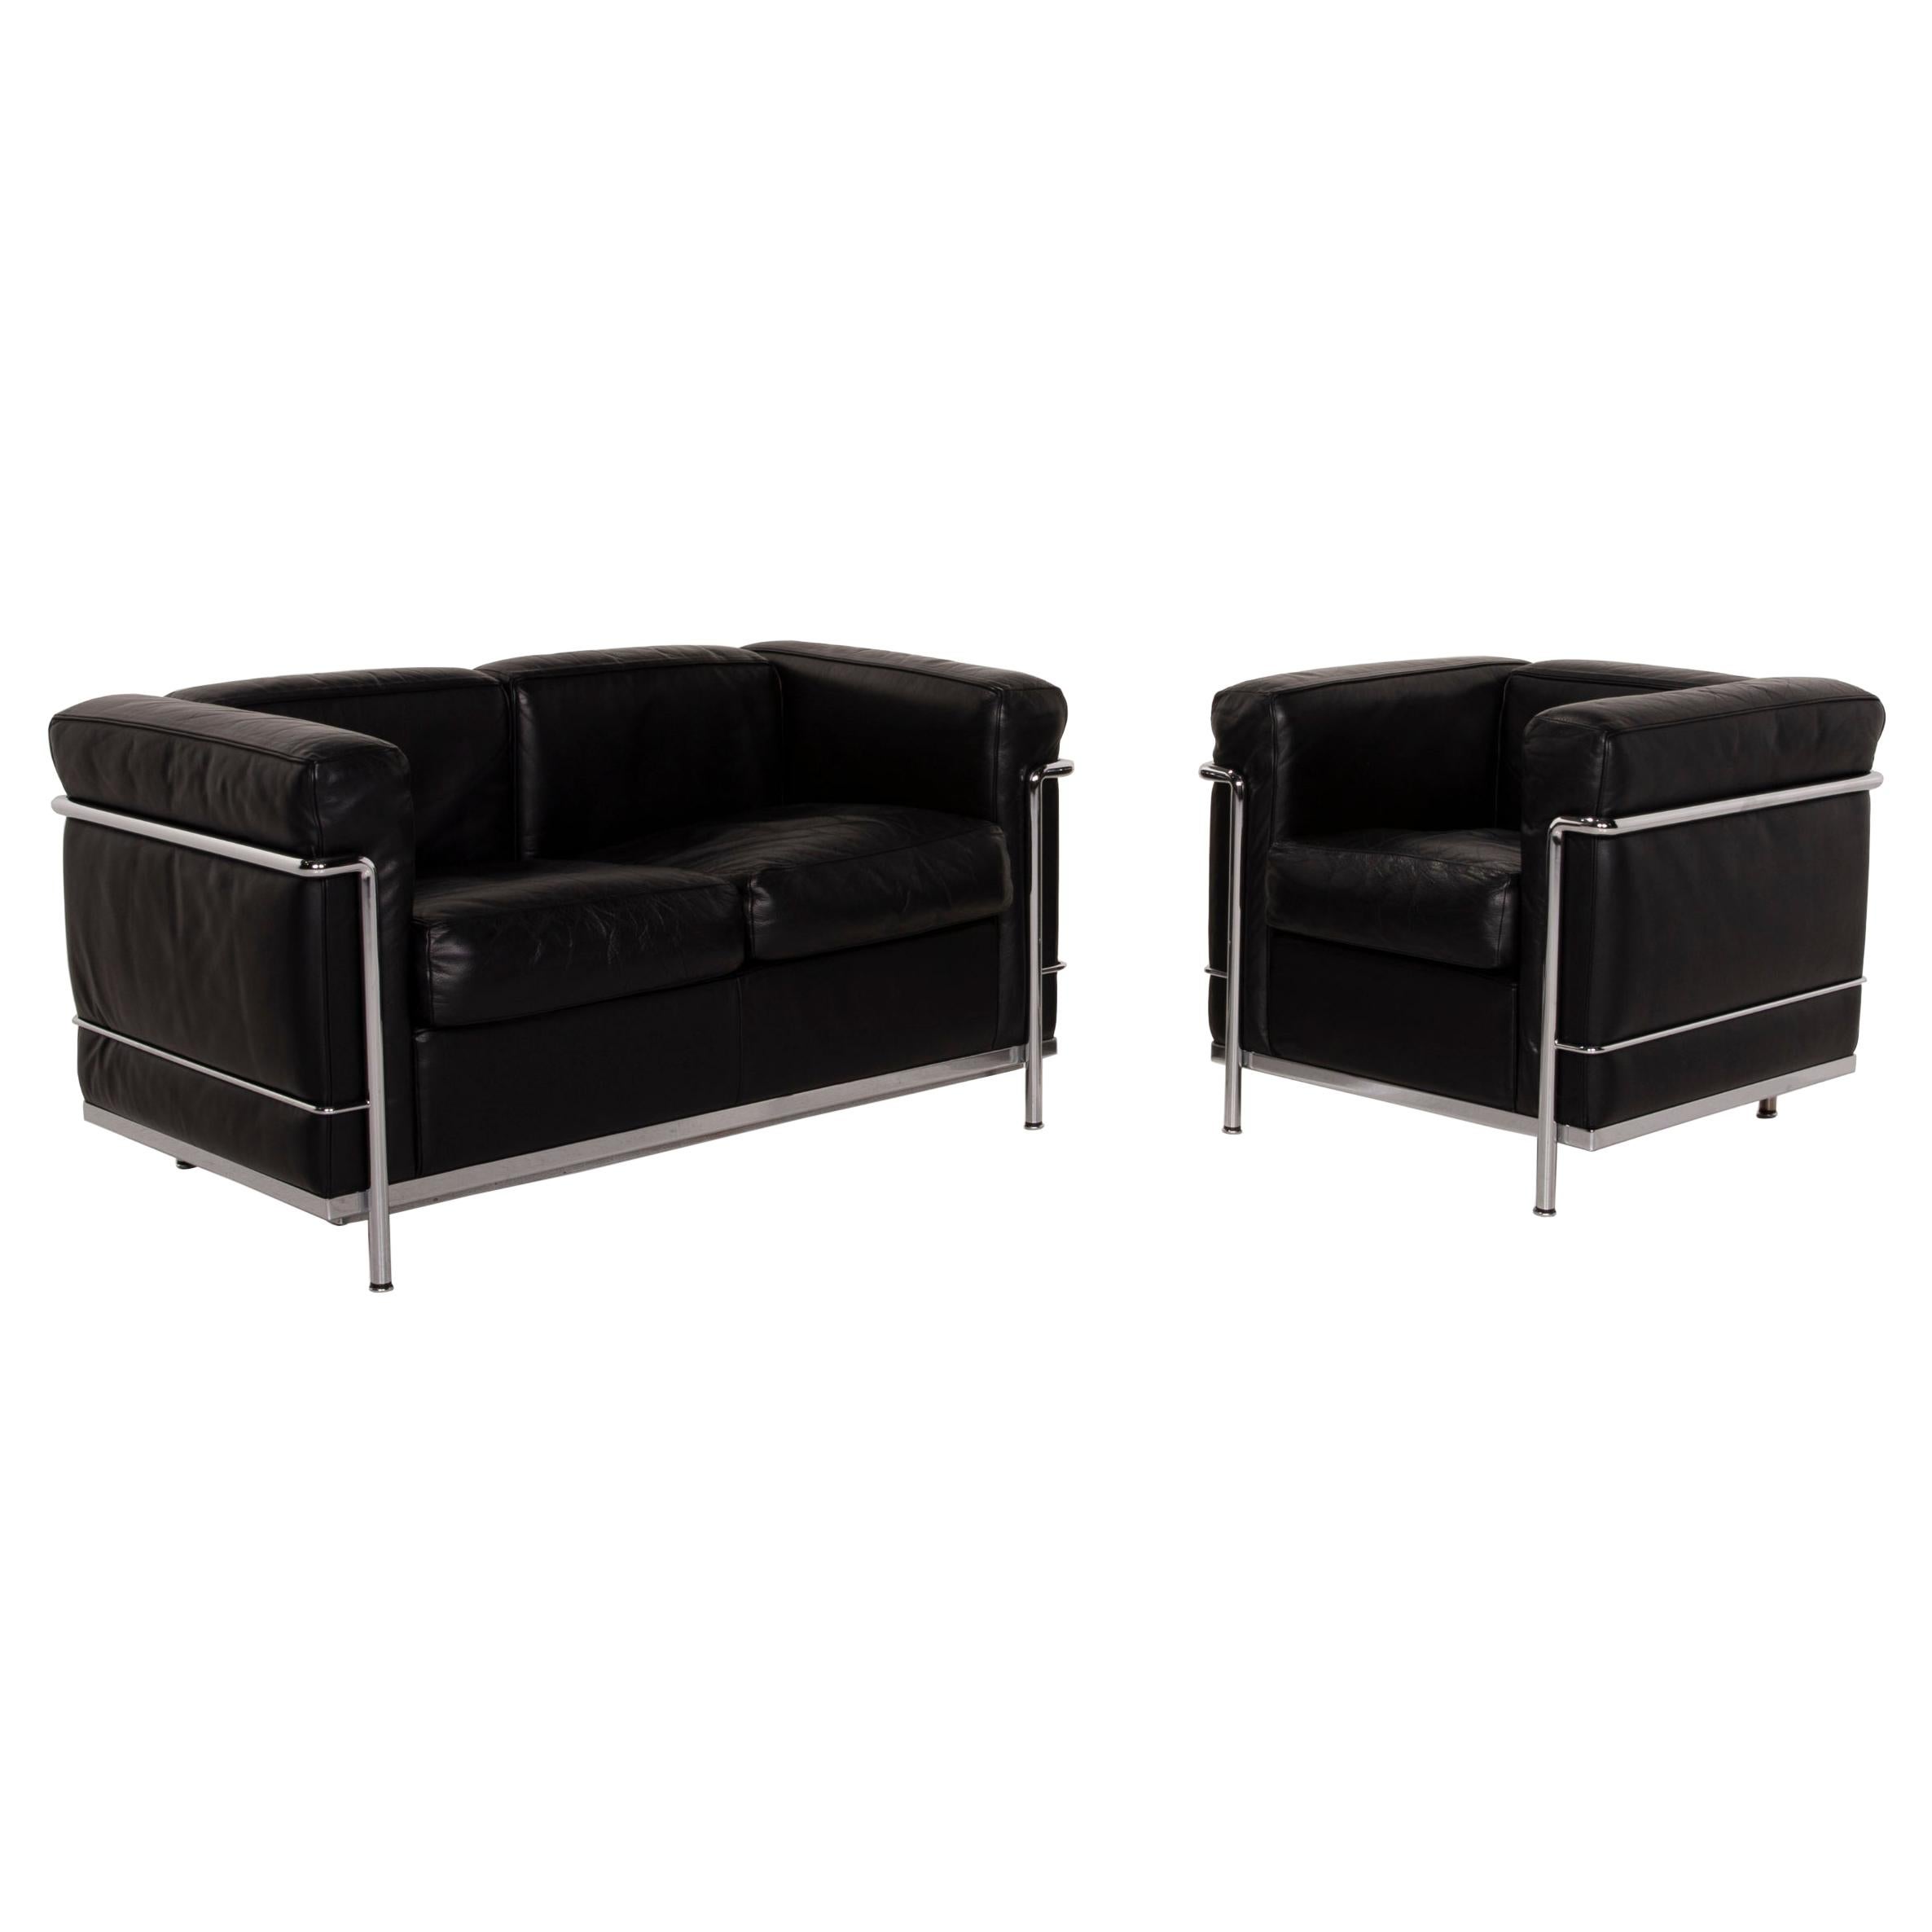 Cassina Lc2 Leather Sofa Set Black Two-Seater Armchair Le Corbusier Chrome